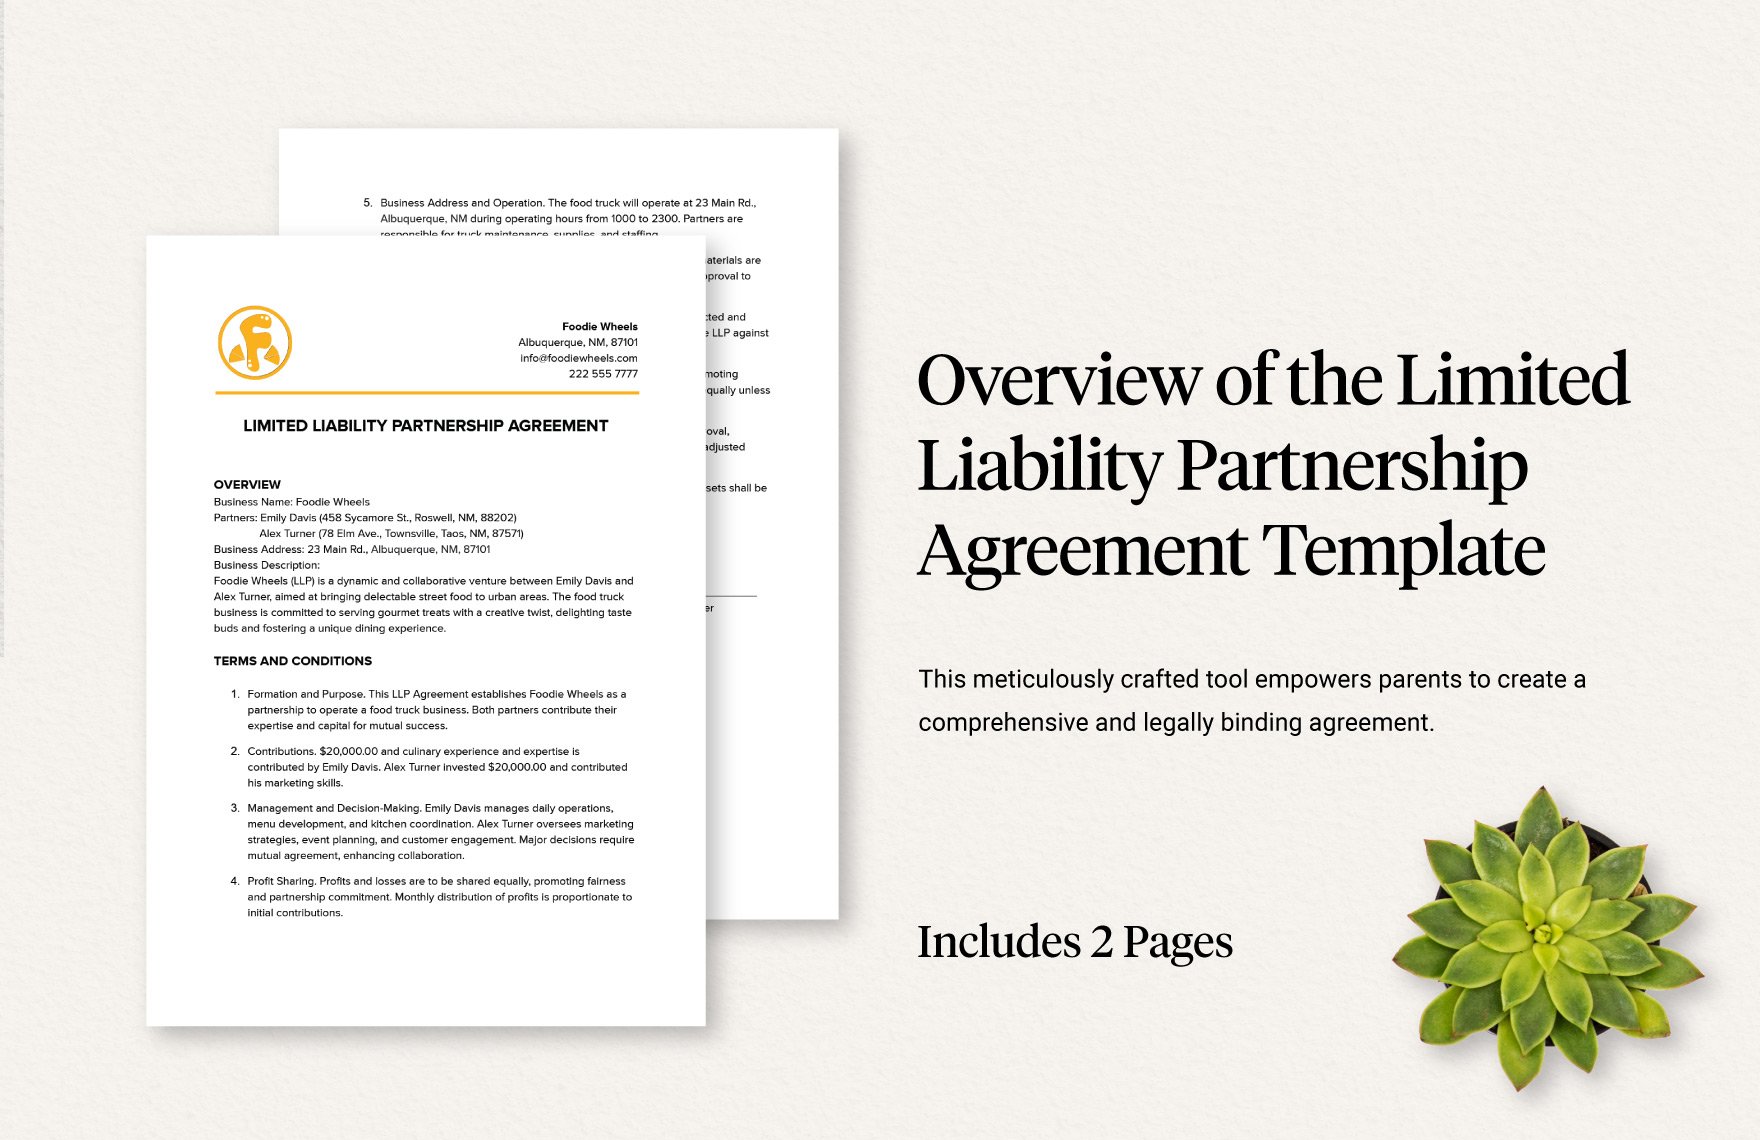 Overview of the Limited Liability Partnership Agreement Template